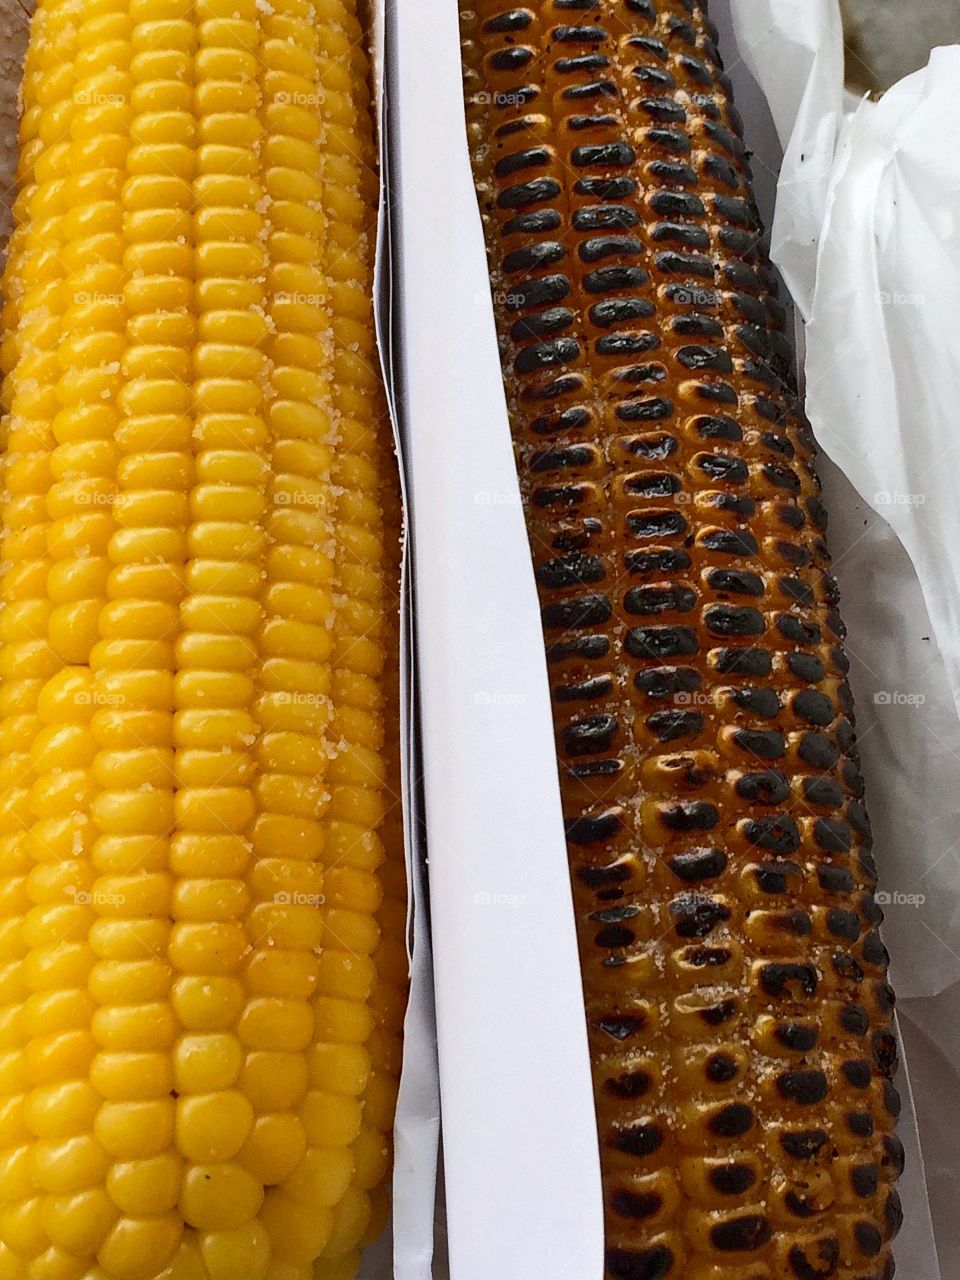 Steamed and grilled corn, Istanbul, Turkey.